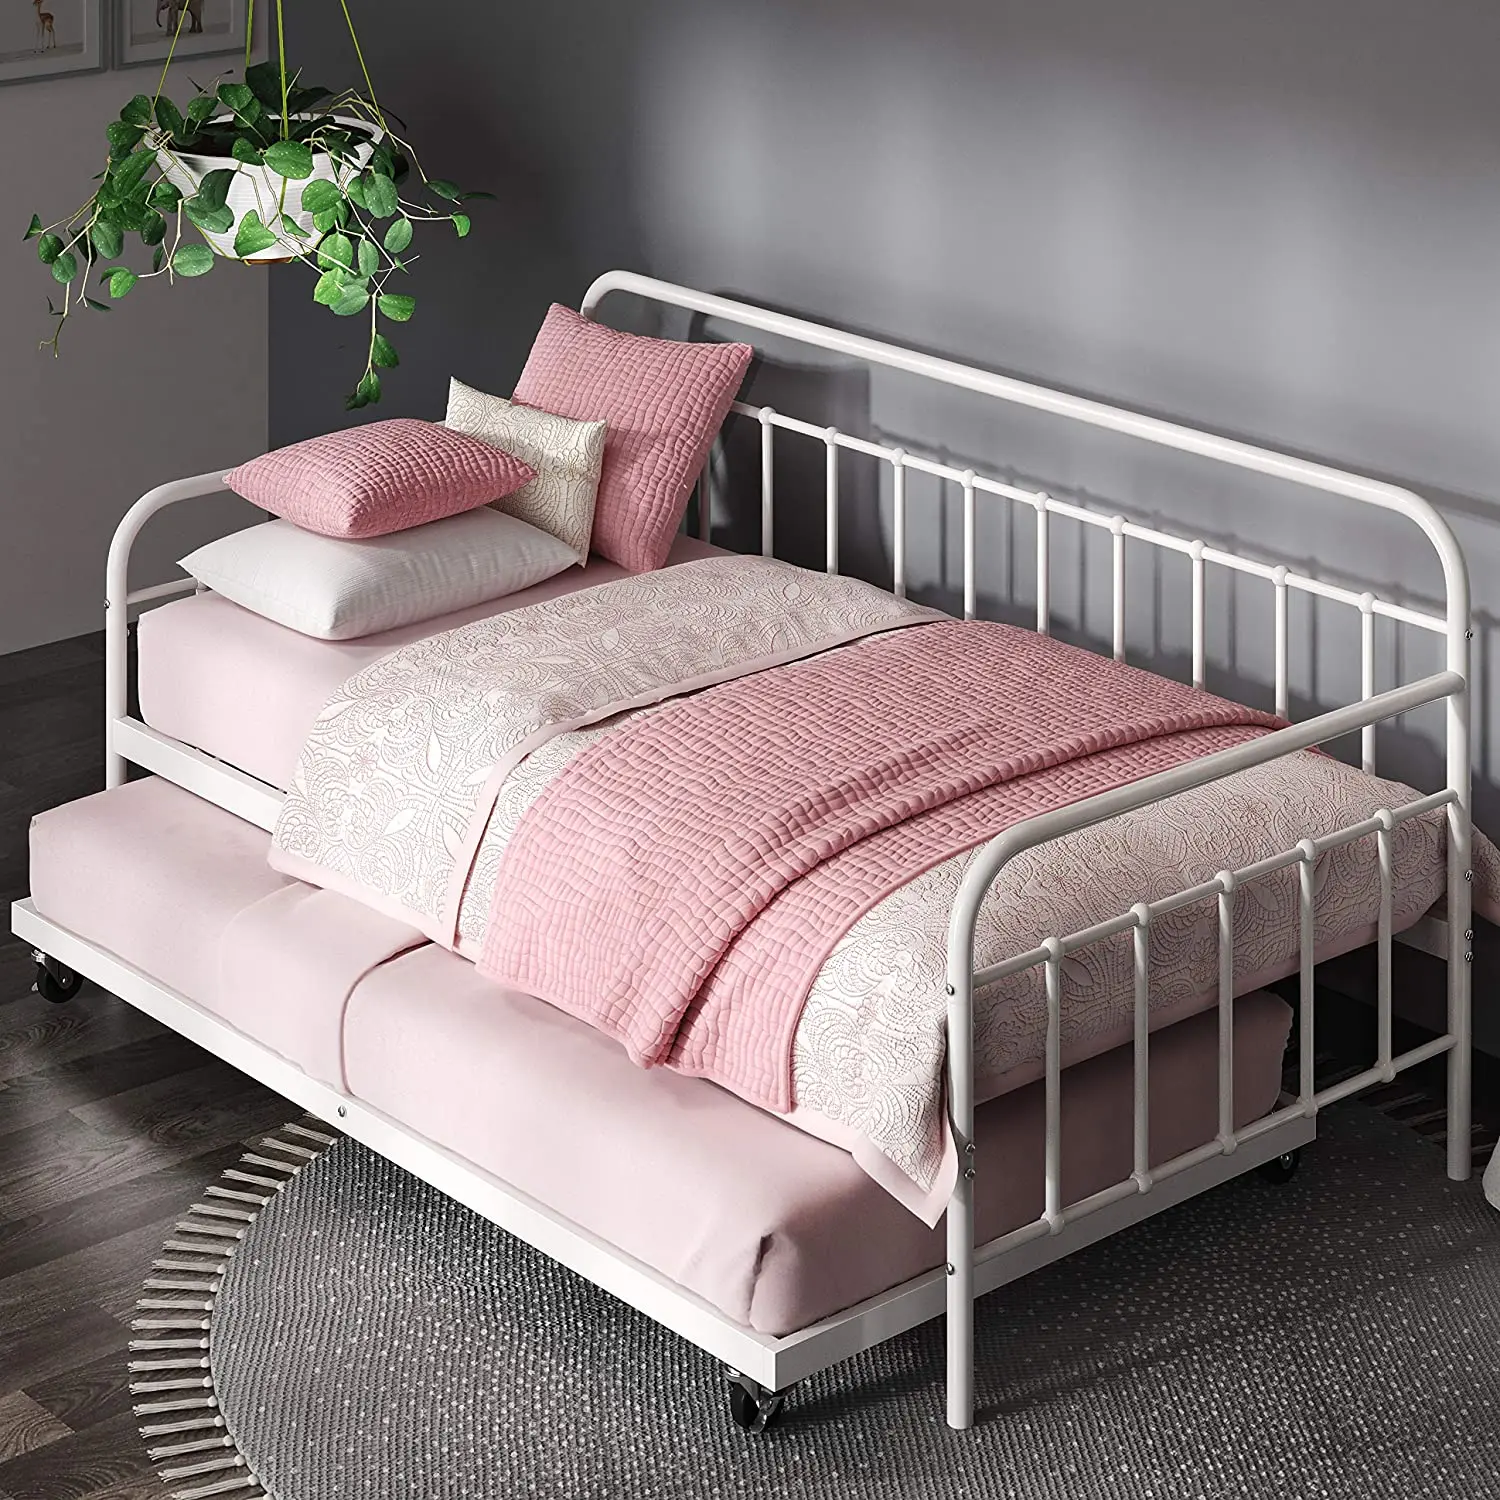 Daybed Frame Twin Metal White Day Bed Small Couch Bedroom Furniture Modern Futon 